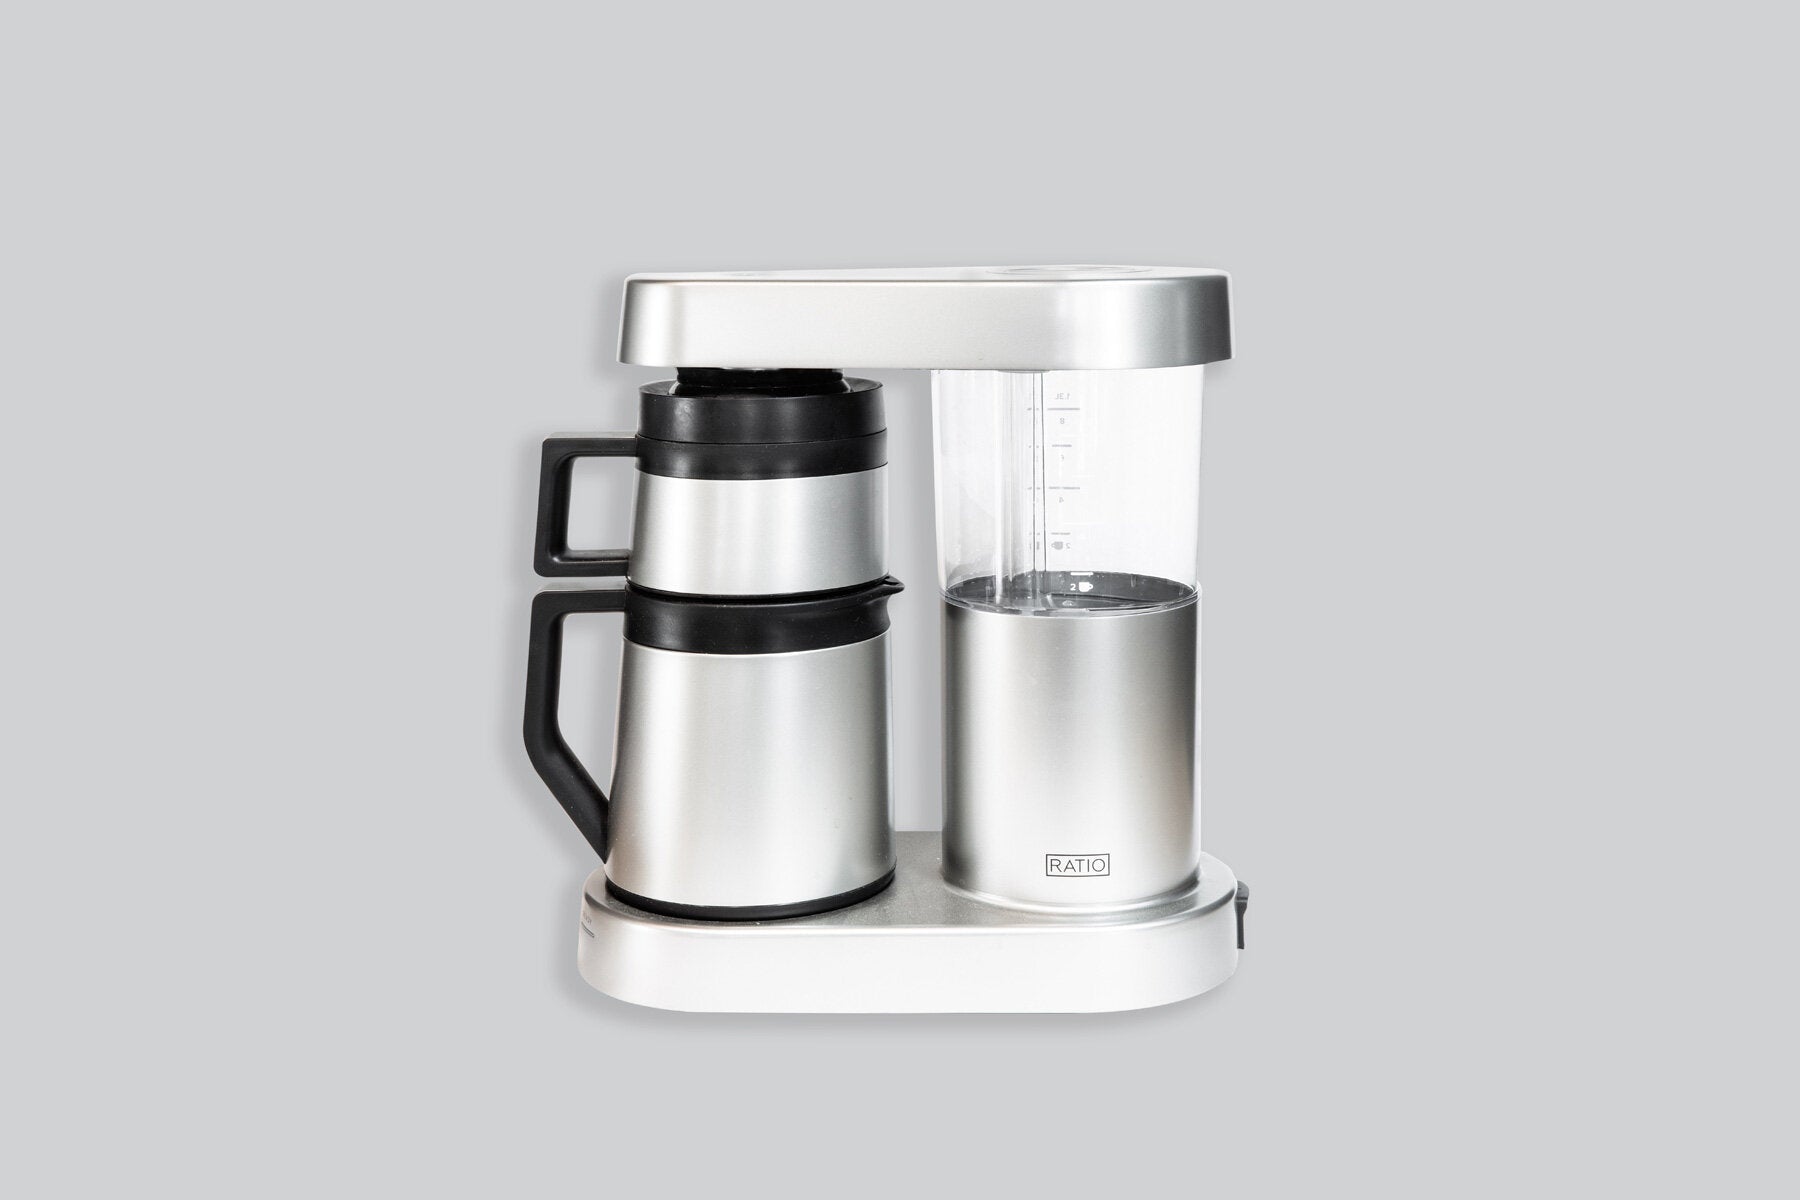 Ratio 6 Coffee Maker with Glass Carafe - $295 Hot Item!